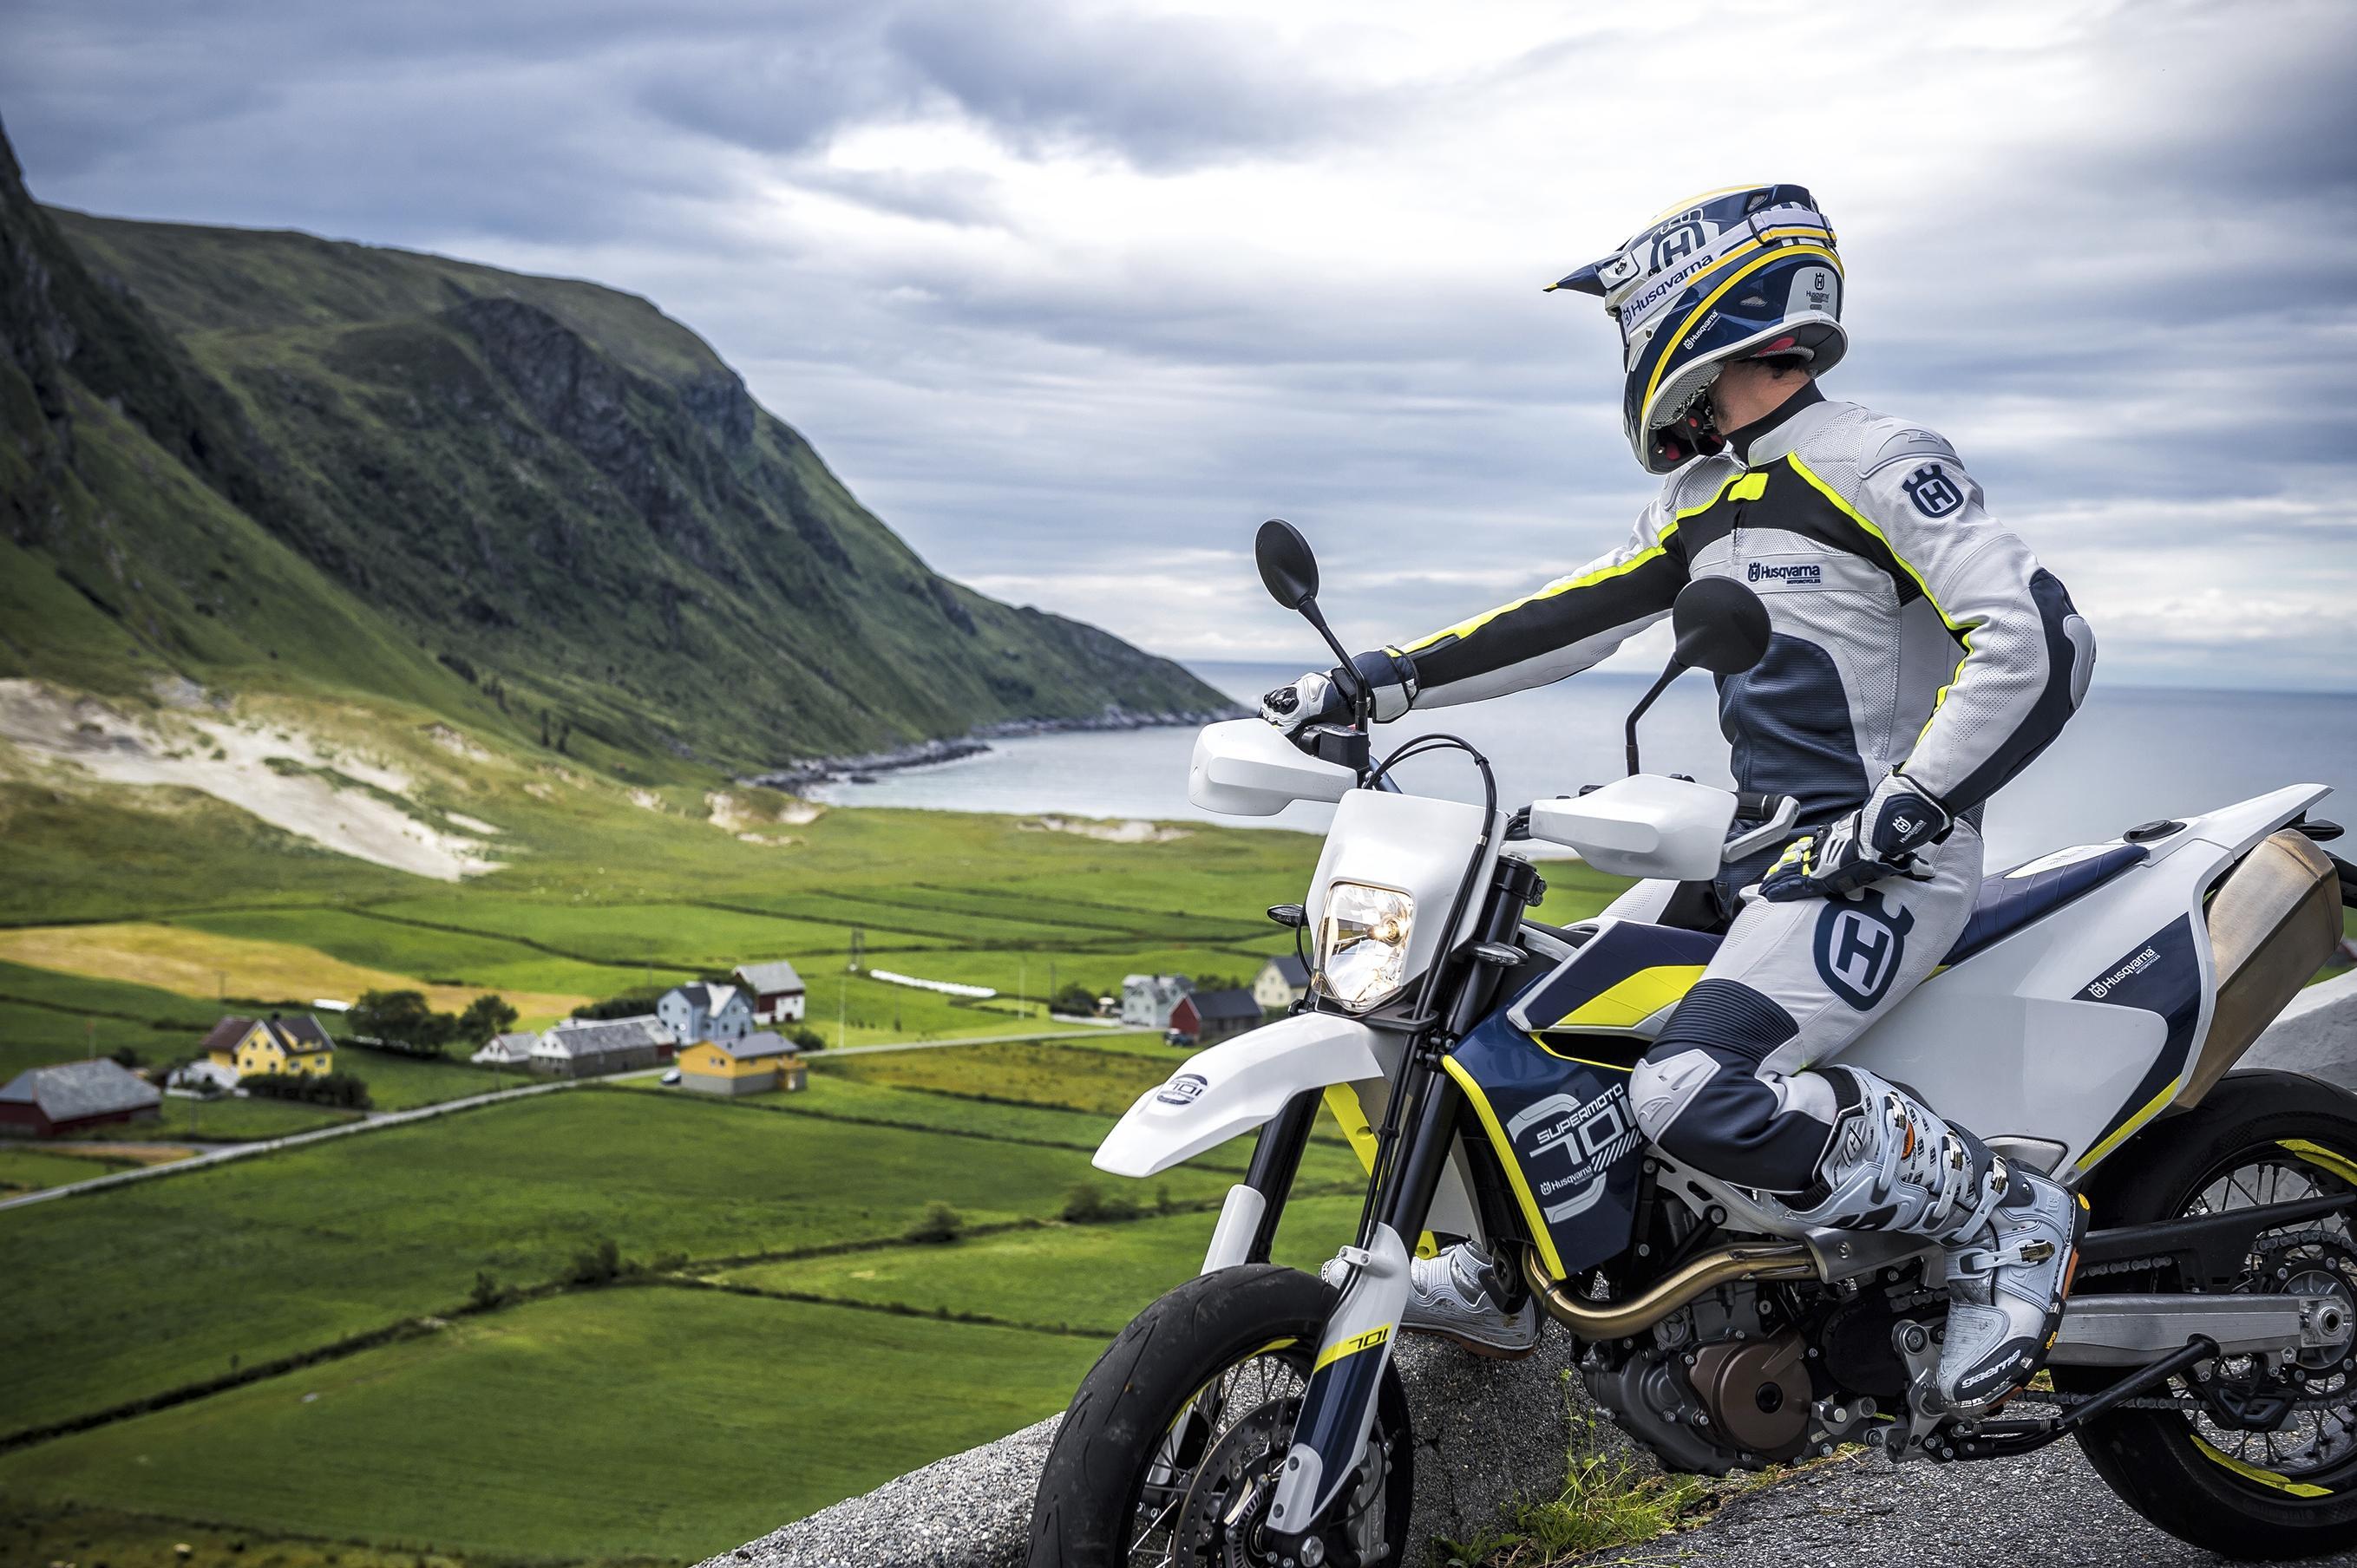 Husqvarna Sold 32% More Motorcycles in Smashed Its Previous